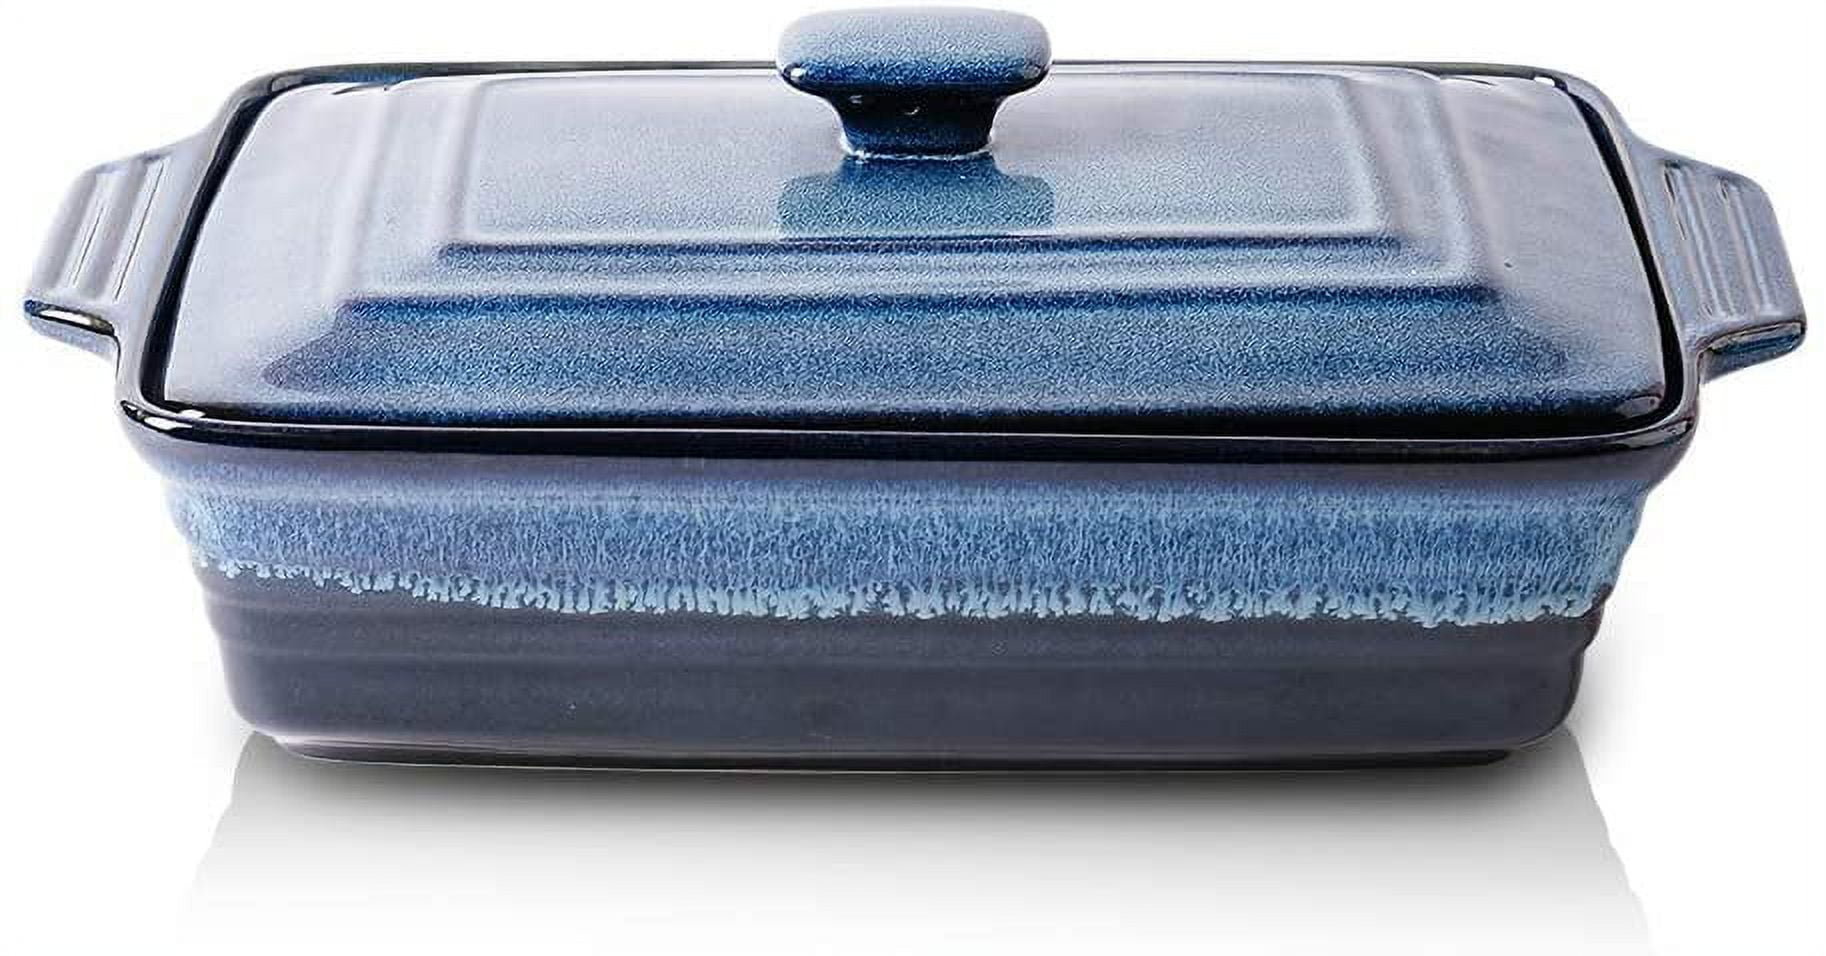 Lareina Large Ceramic Casserole Dish with Lid, 4.0 Quart Covered  Rectangular Stoneware Baking Dishes for Oven, Deep 9x13 Inch Lasagna Pans  for Baking